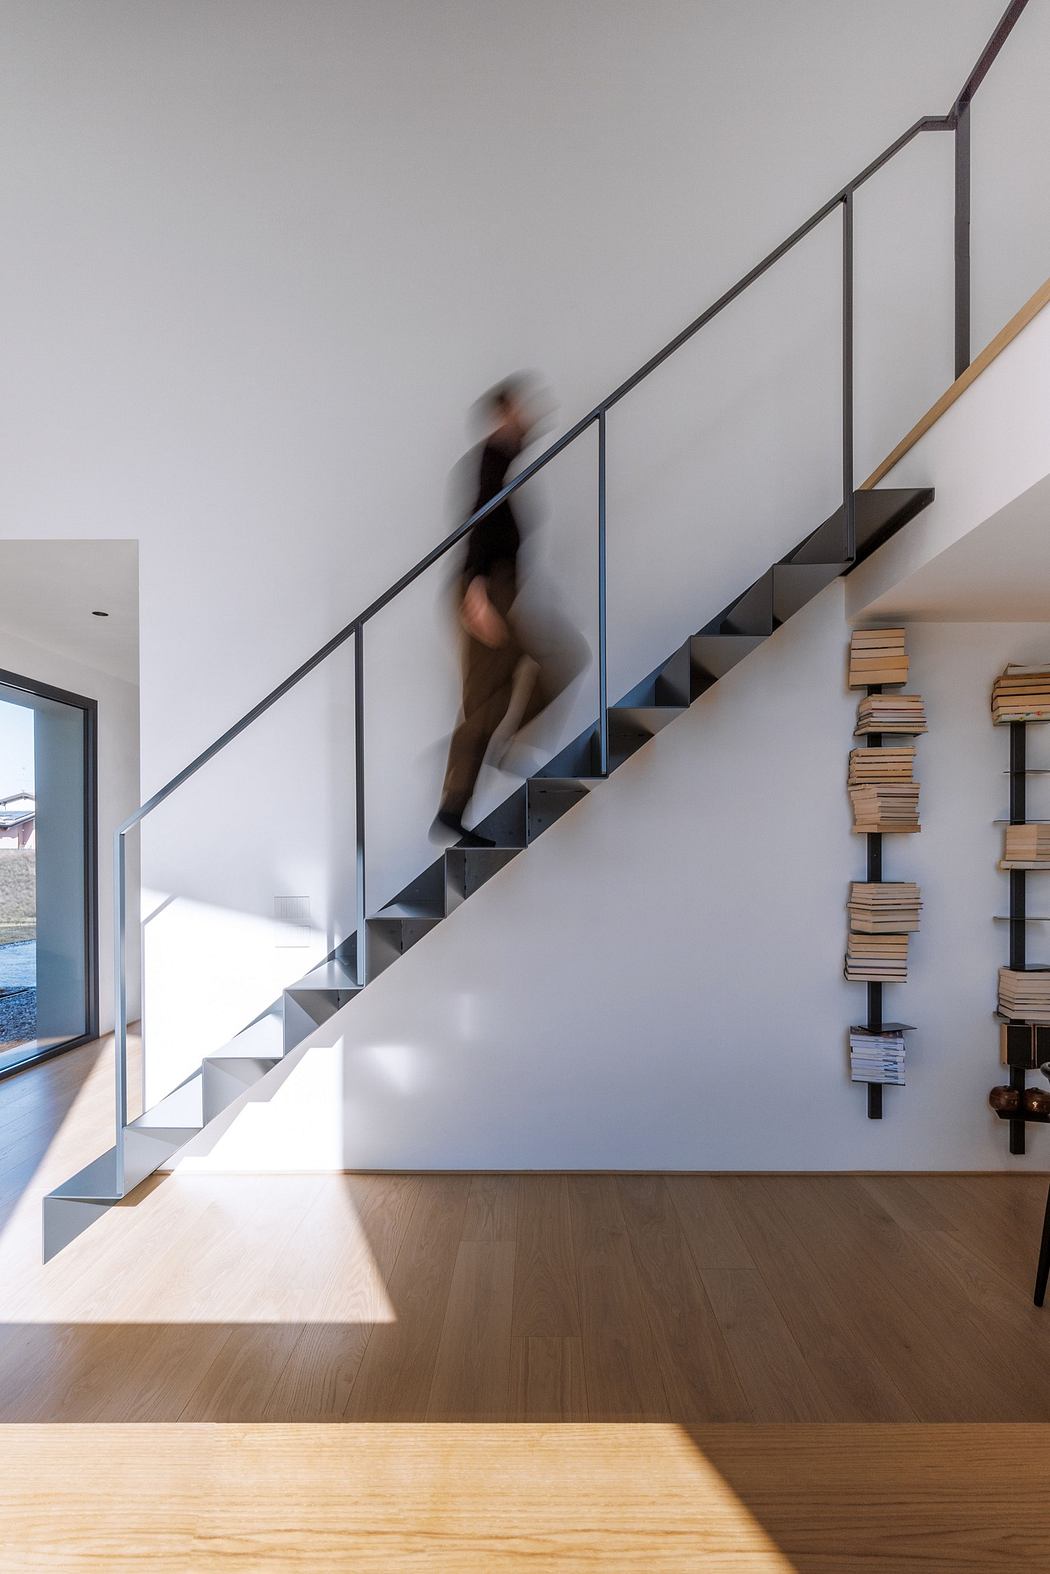 Modern staircase with a person ascending and wooden floor details.